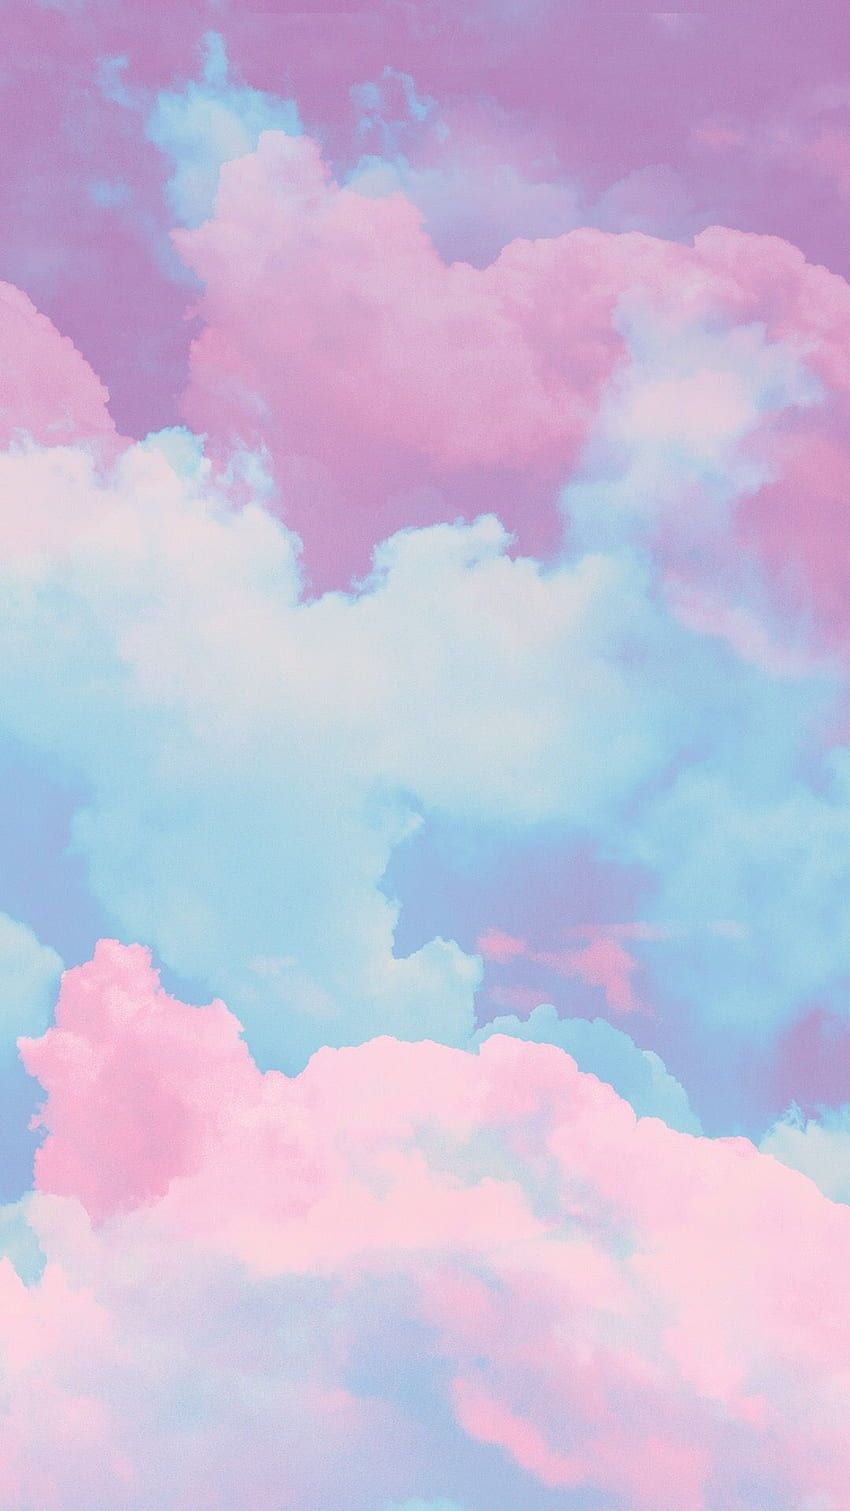 A pink and blue cloudy sky - Colorful